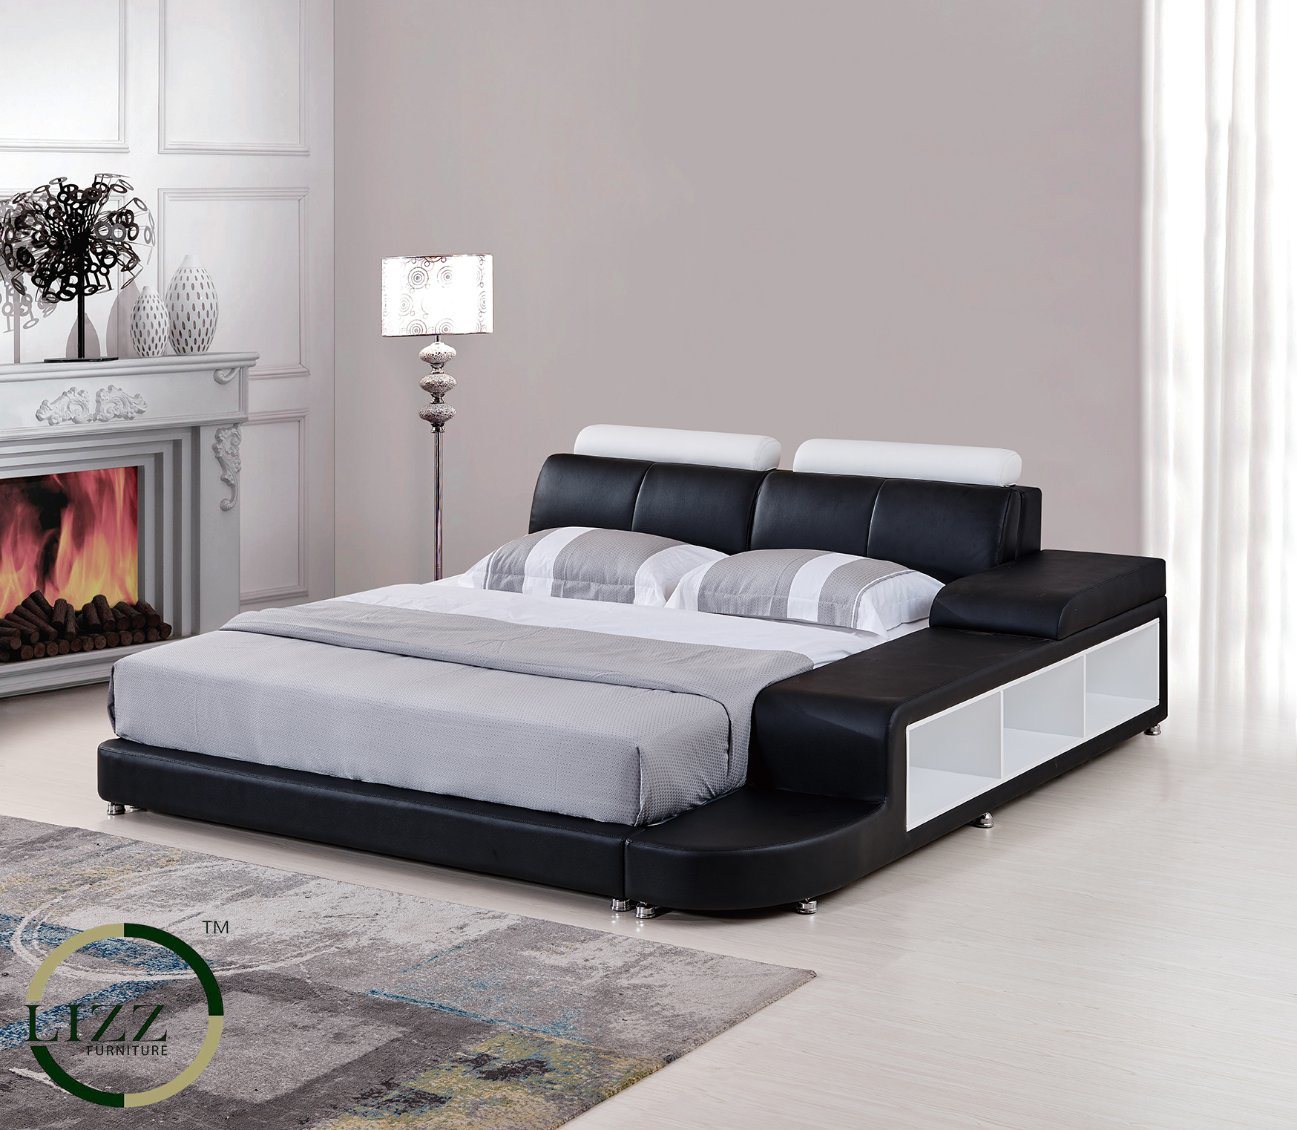 Middle Eastern Upholstered Leather Bed with Storage